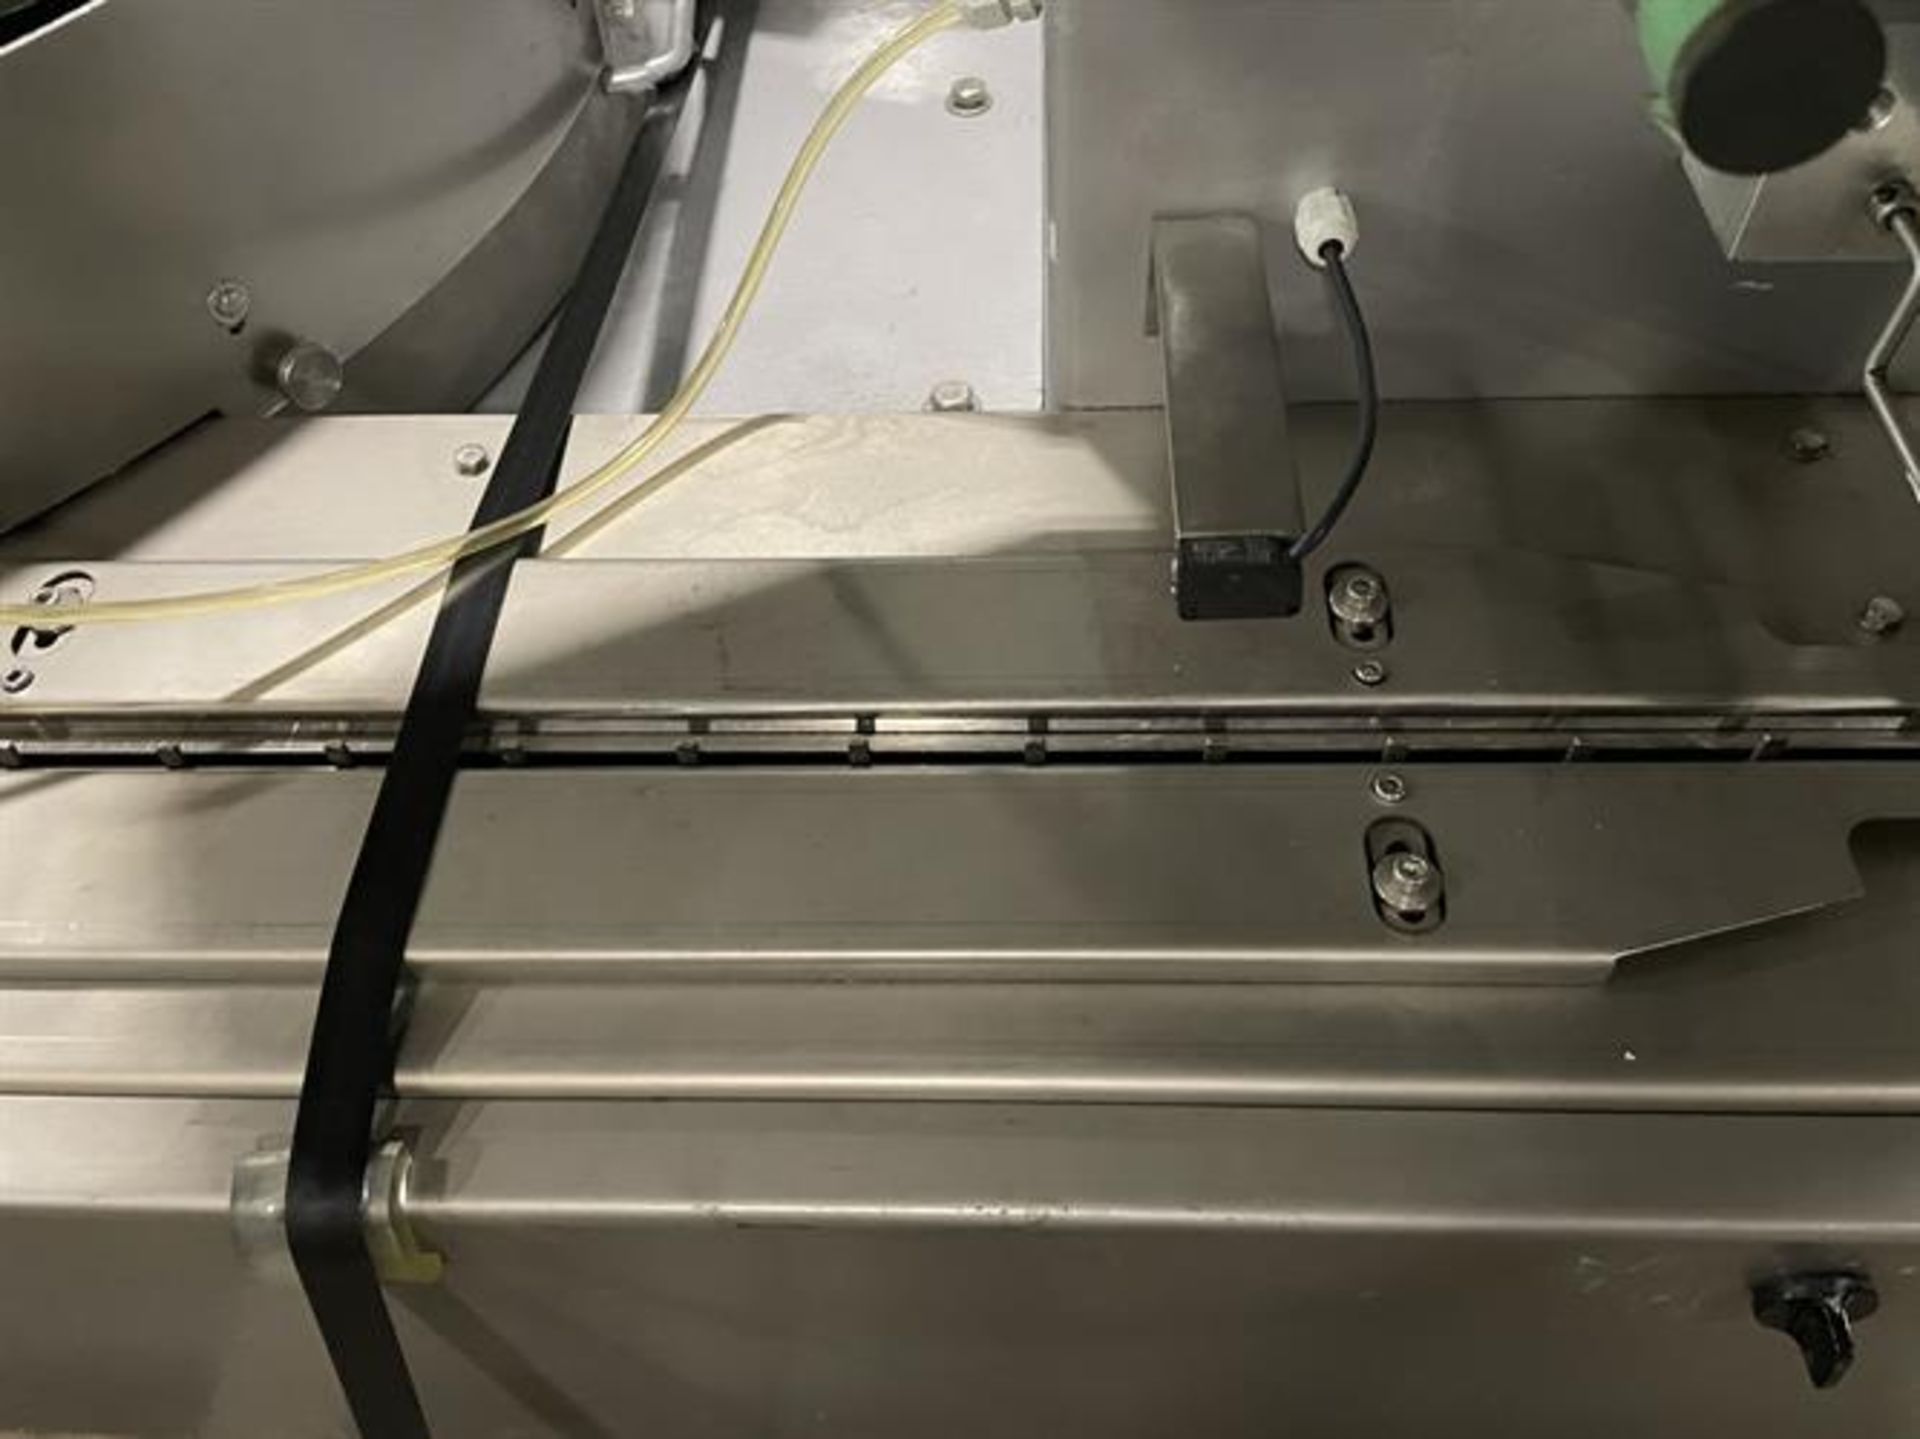 Flow Wrapper for Hard Candy - Sick electric eye for film registration - Vibratory bowl feeder - - Image 8 of 20